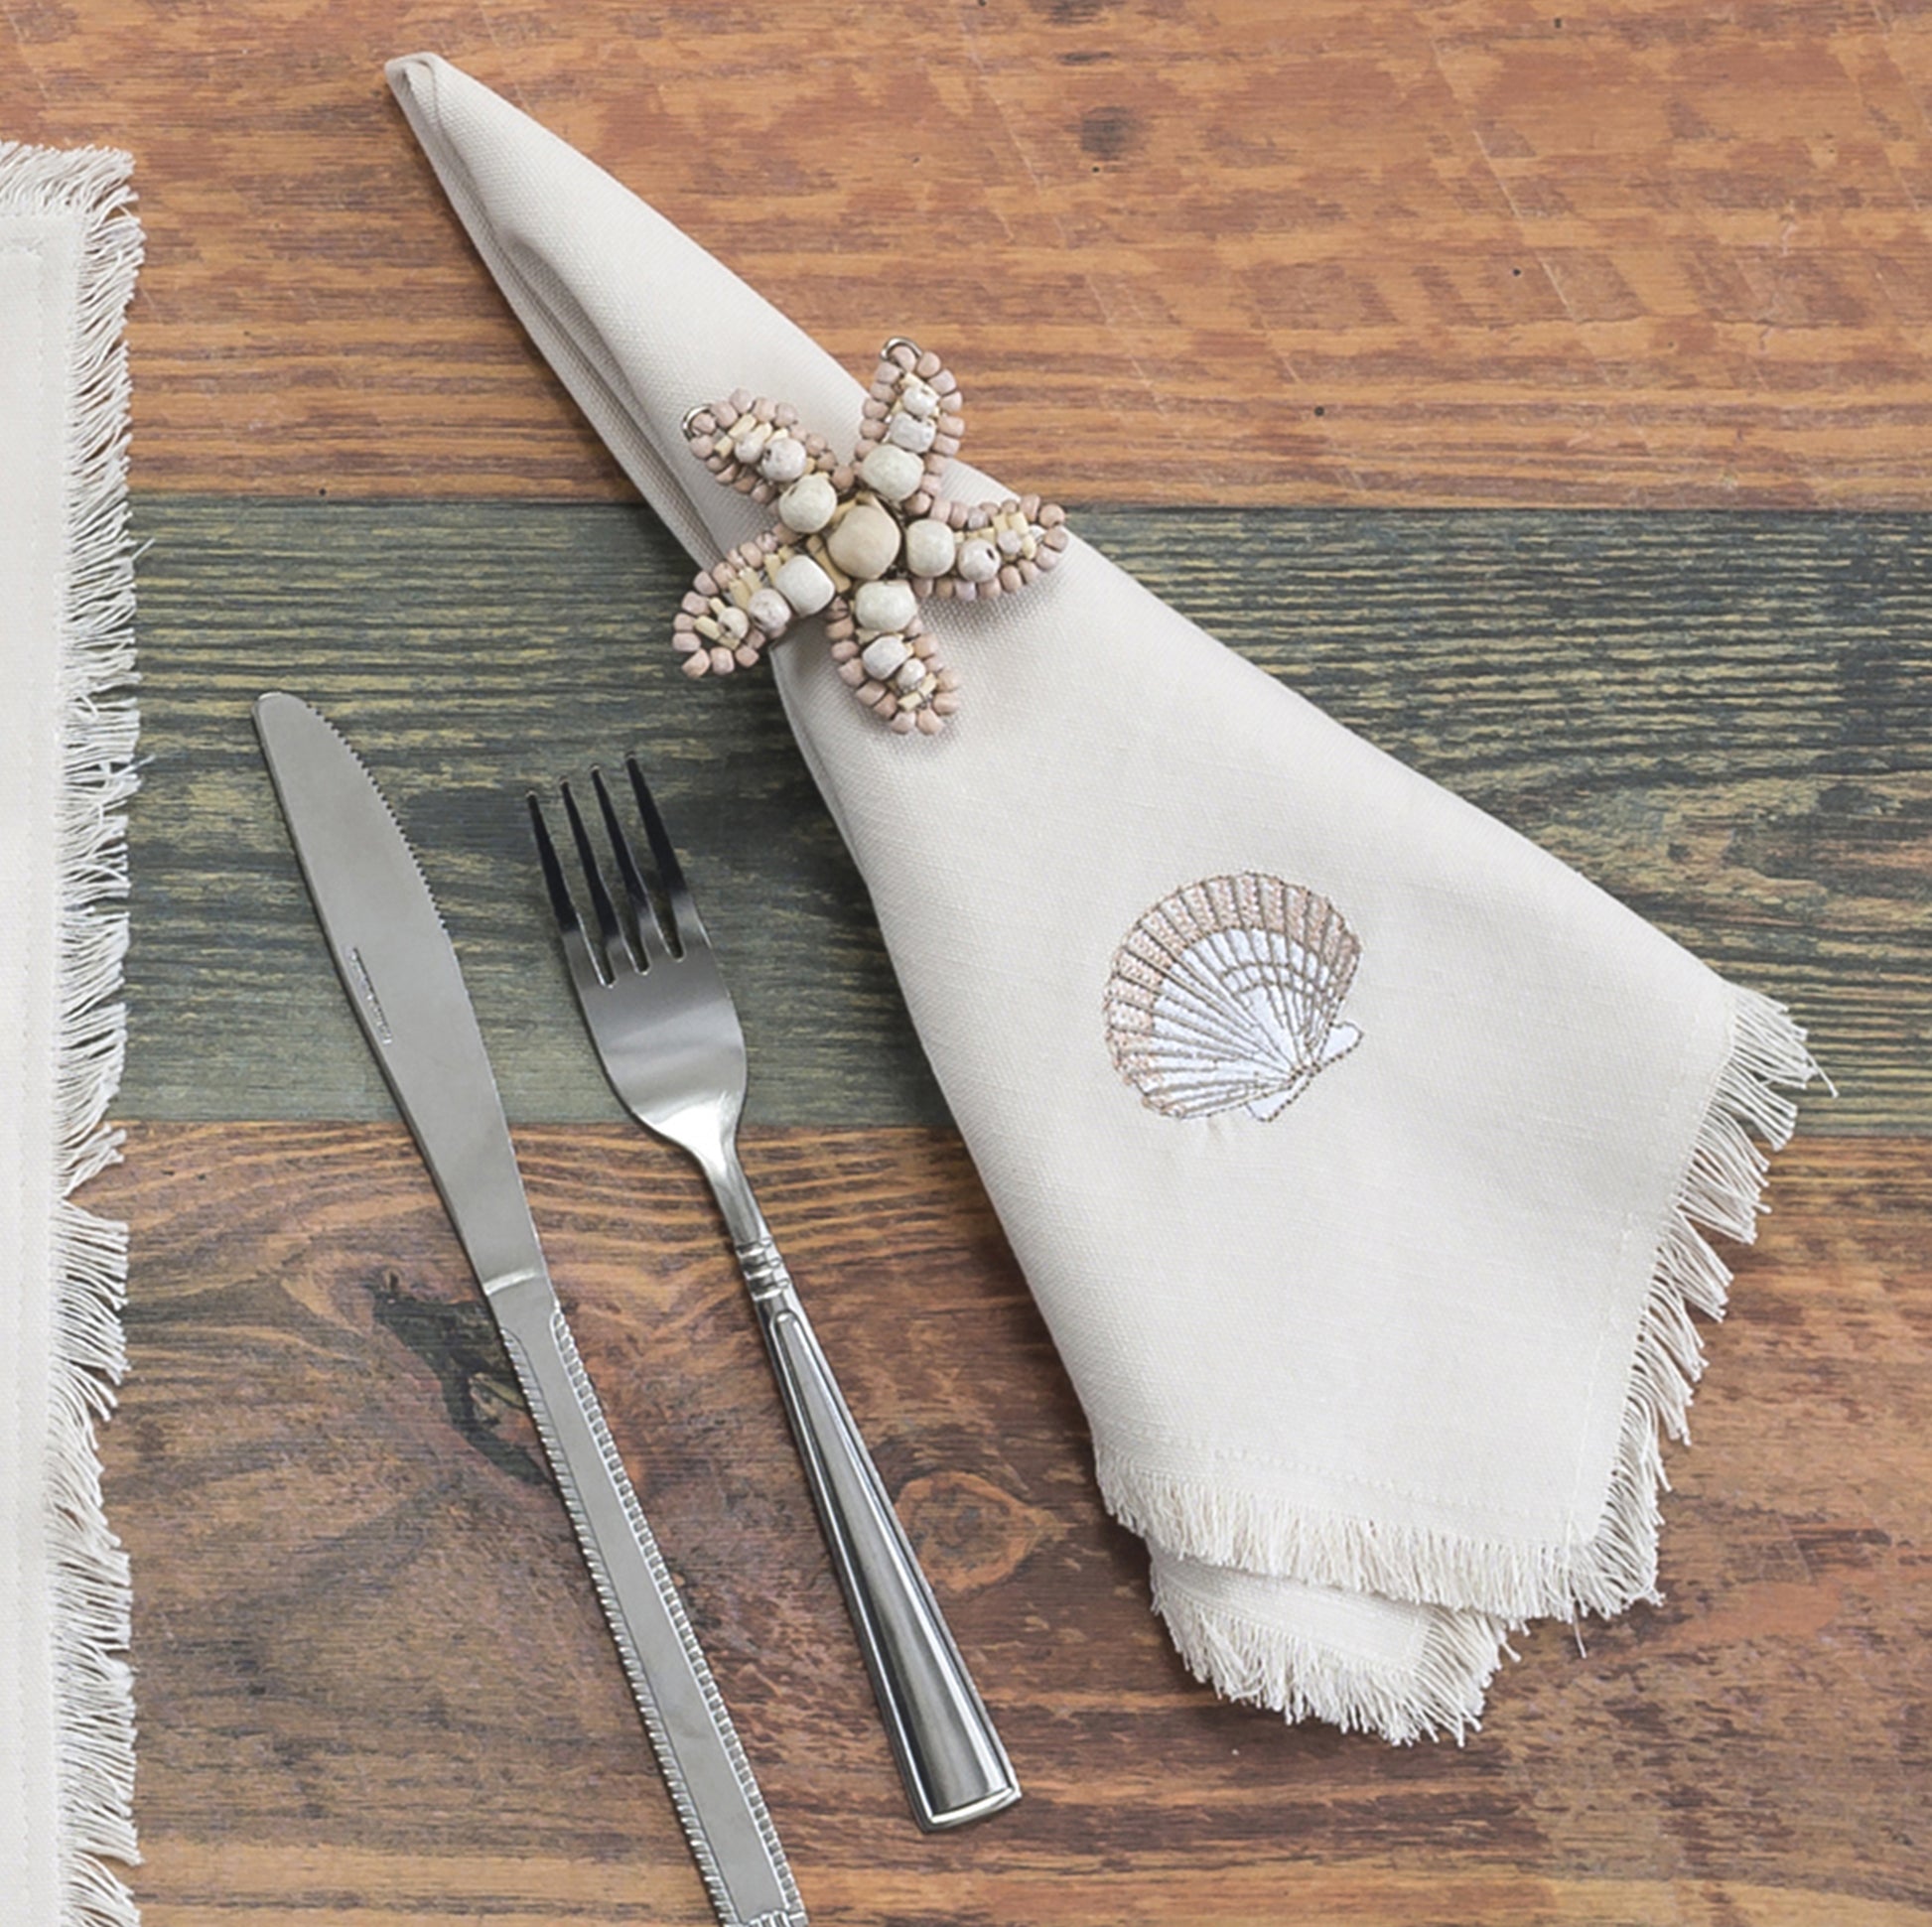 Shell napkin wrapped in Sea star shaped napkin ring crafted of natural beads.